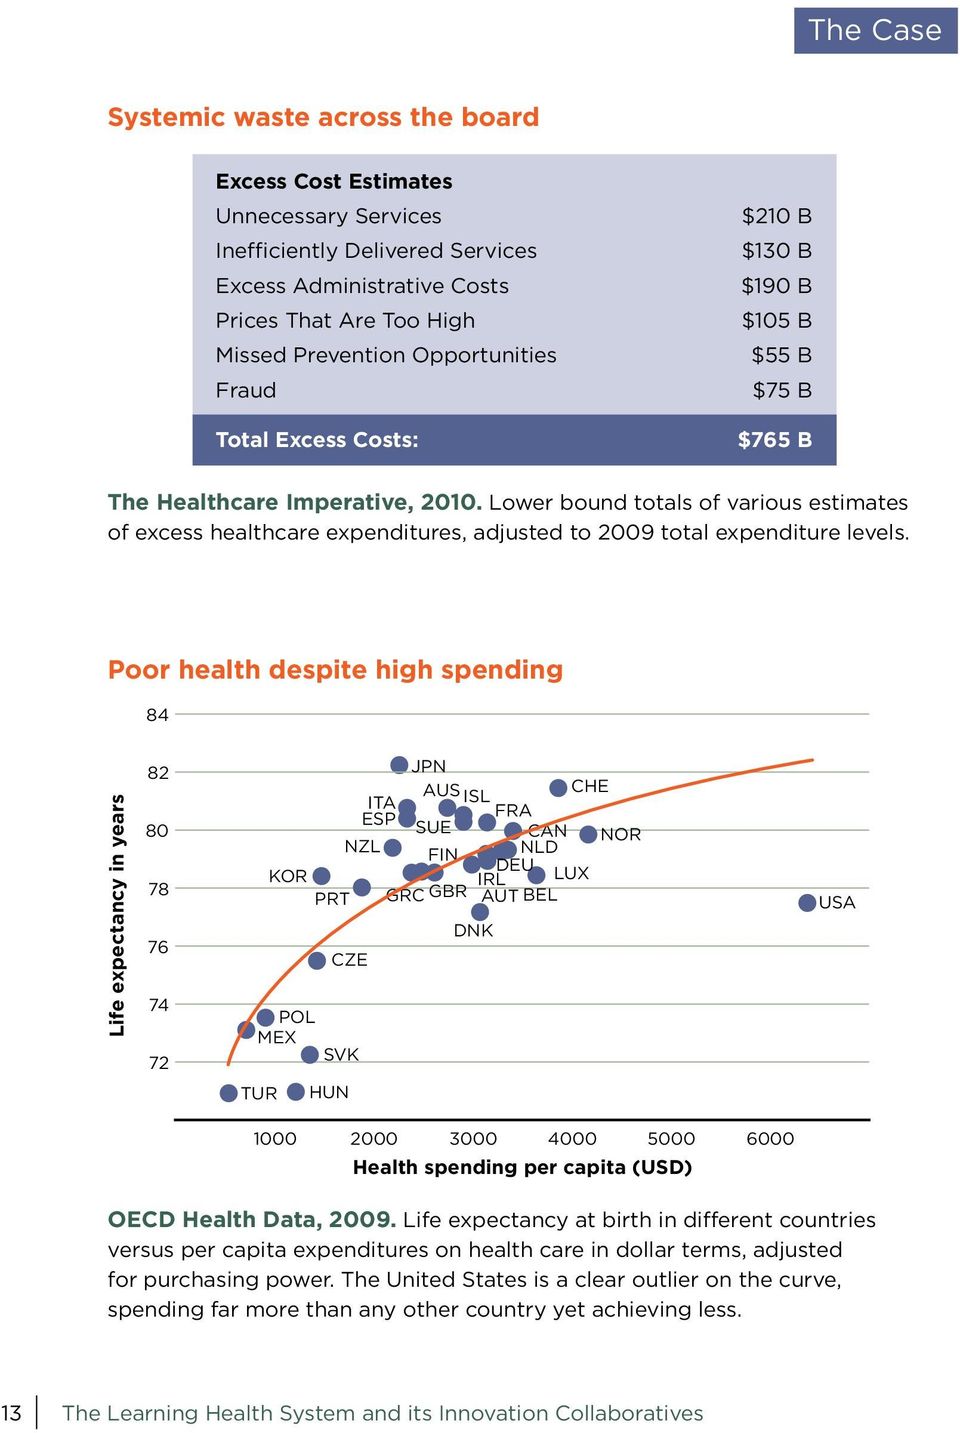 Lower bound totals of various estimates of excess healthcare expenditures, adjusted to 2009 total expenditure levels.